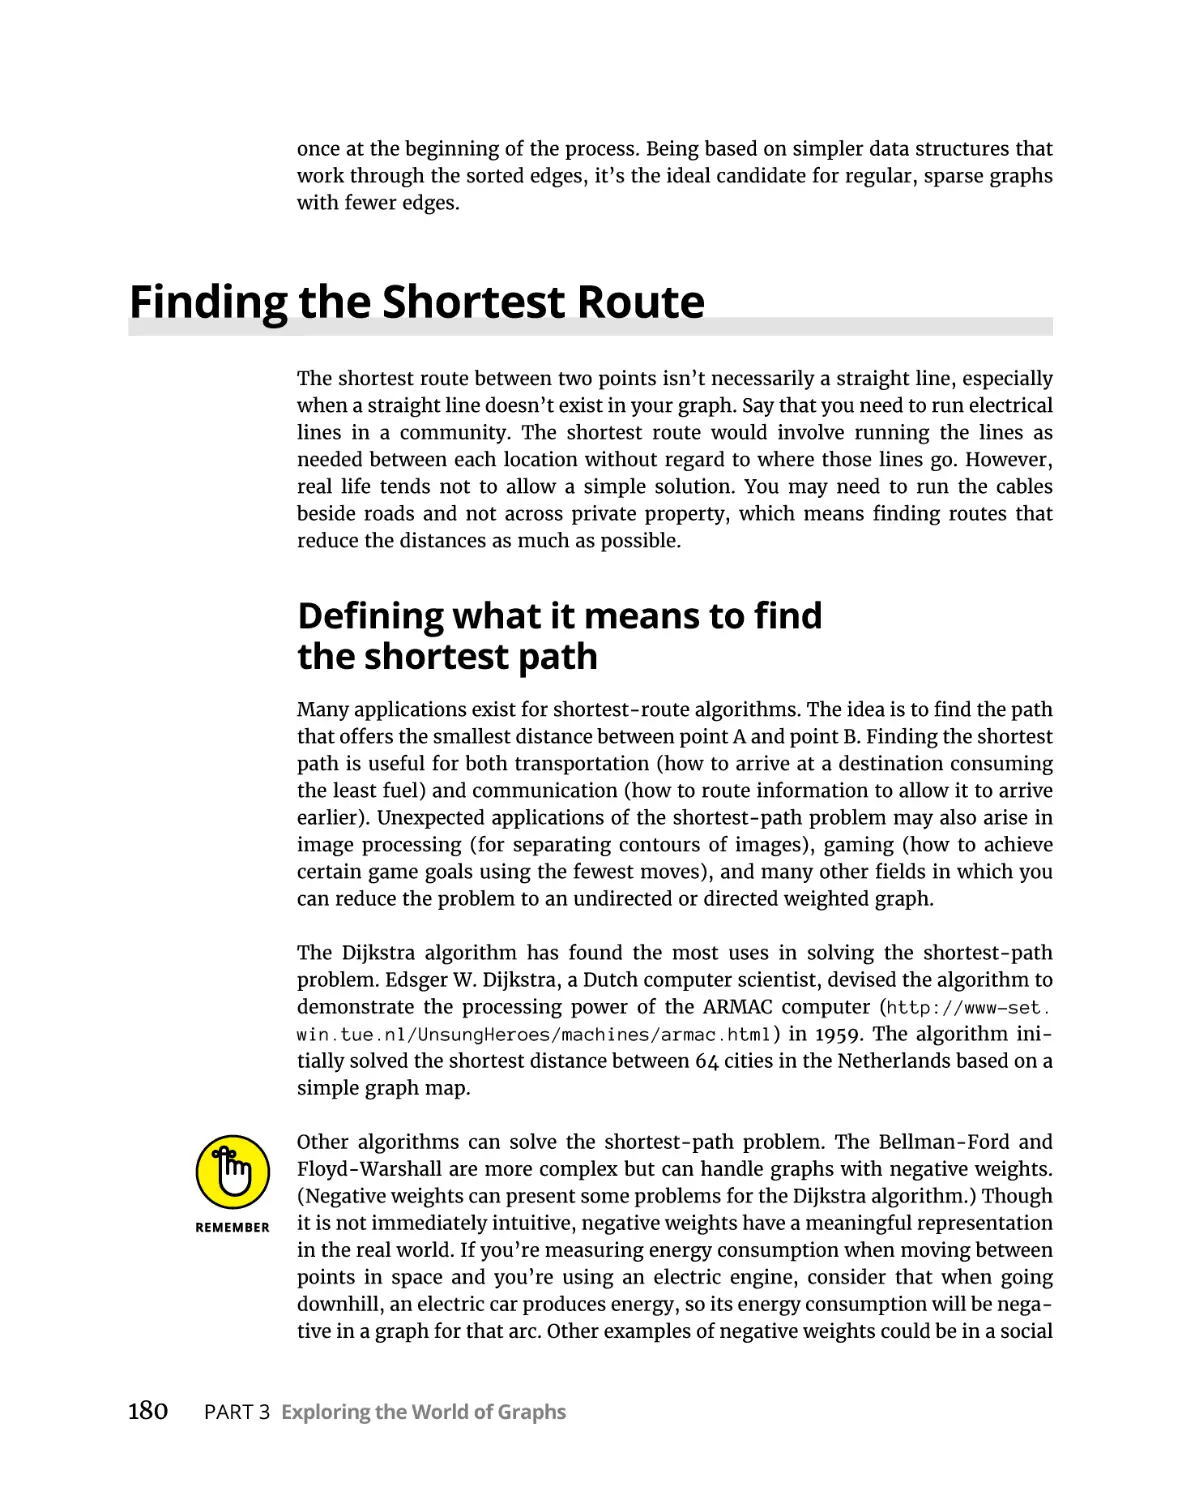 Finding the Shortest Route
Defining what it means to find the shortest path